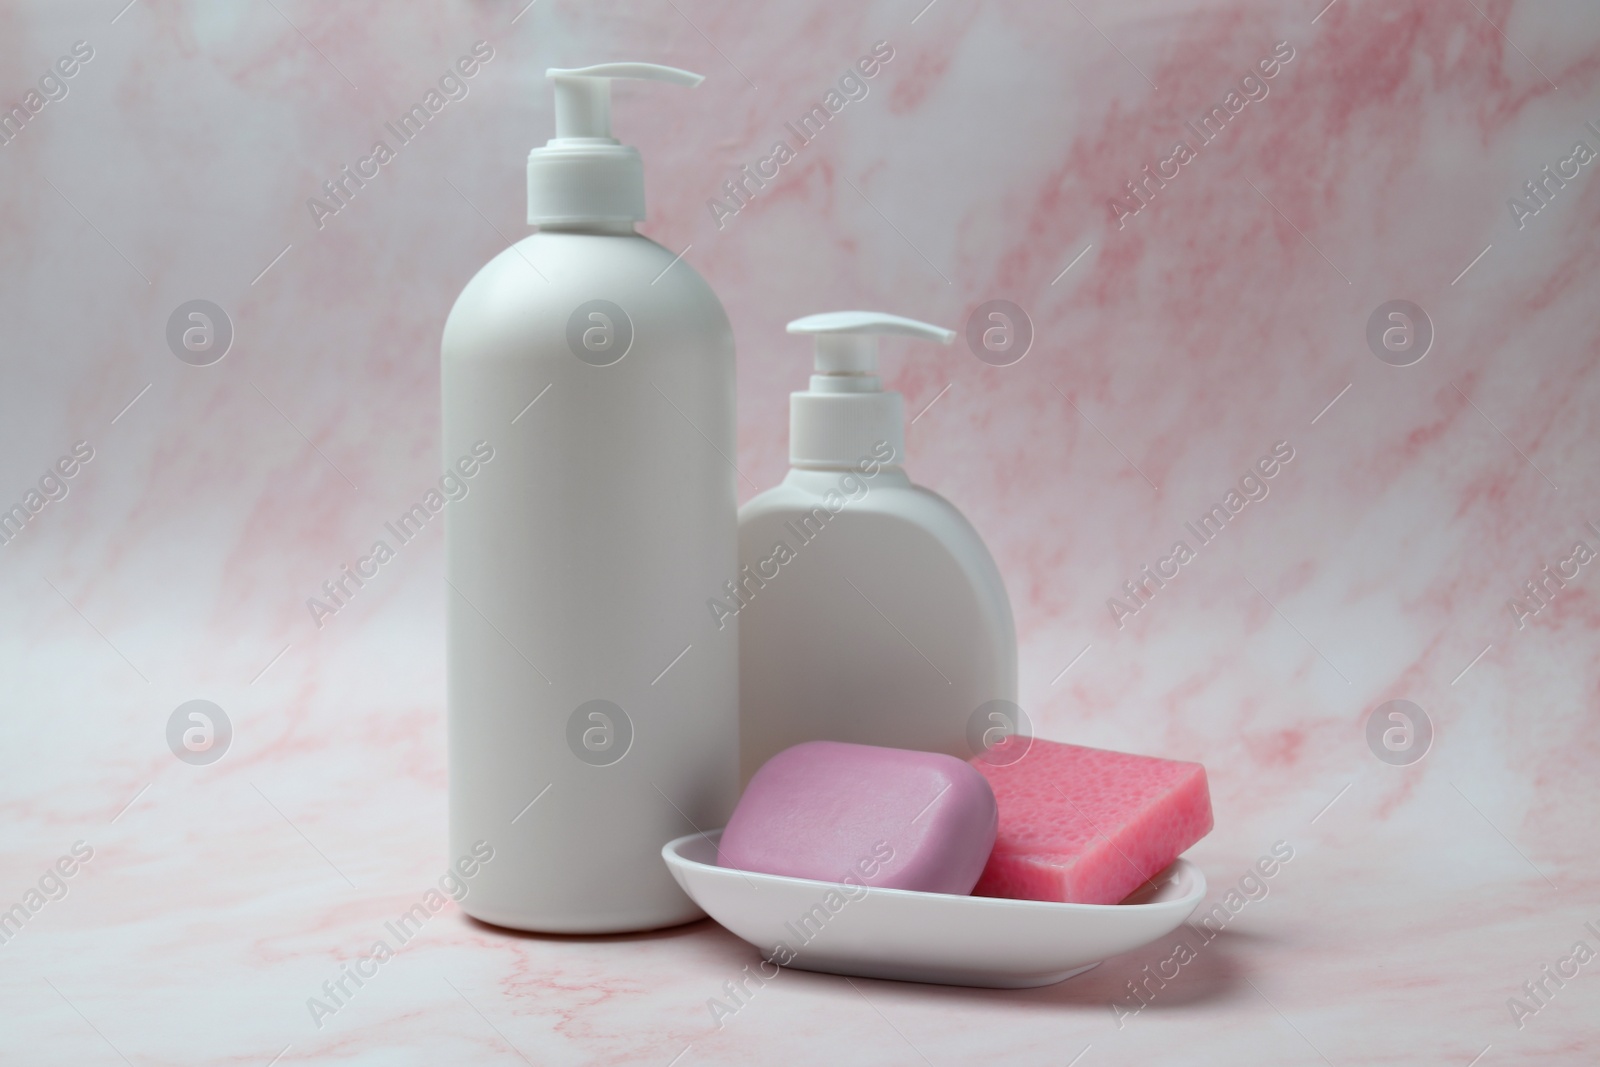 Photo of Soap bars and bottle dispensers on pink marble background